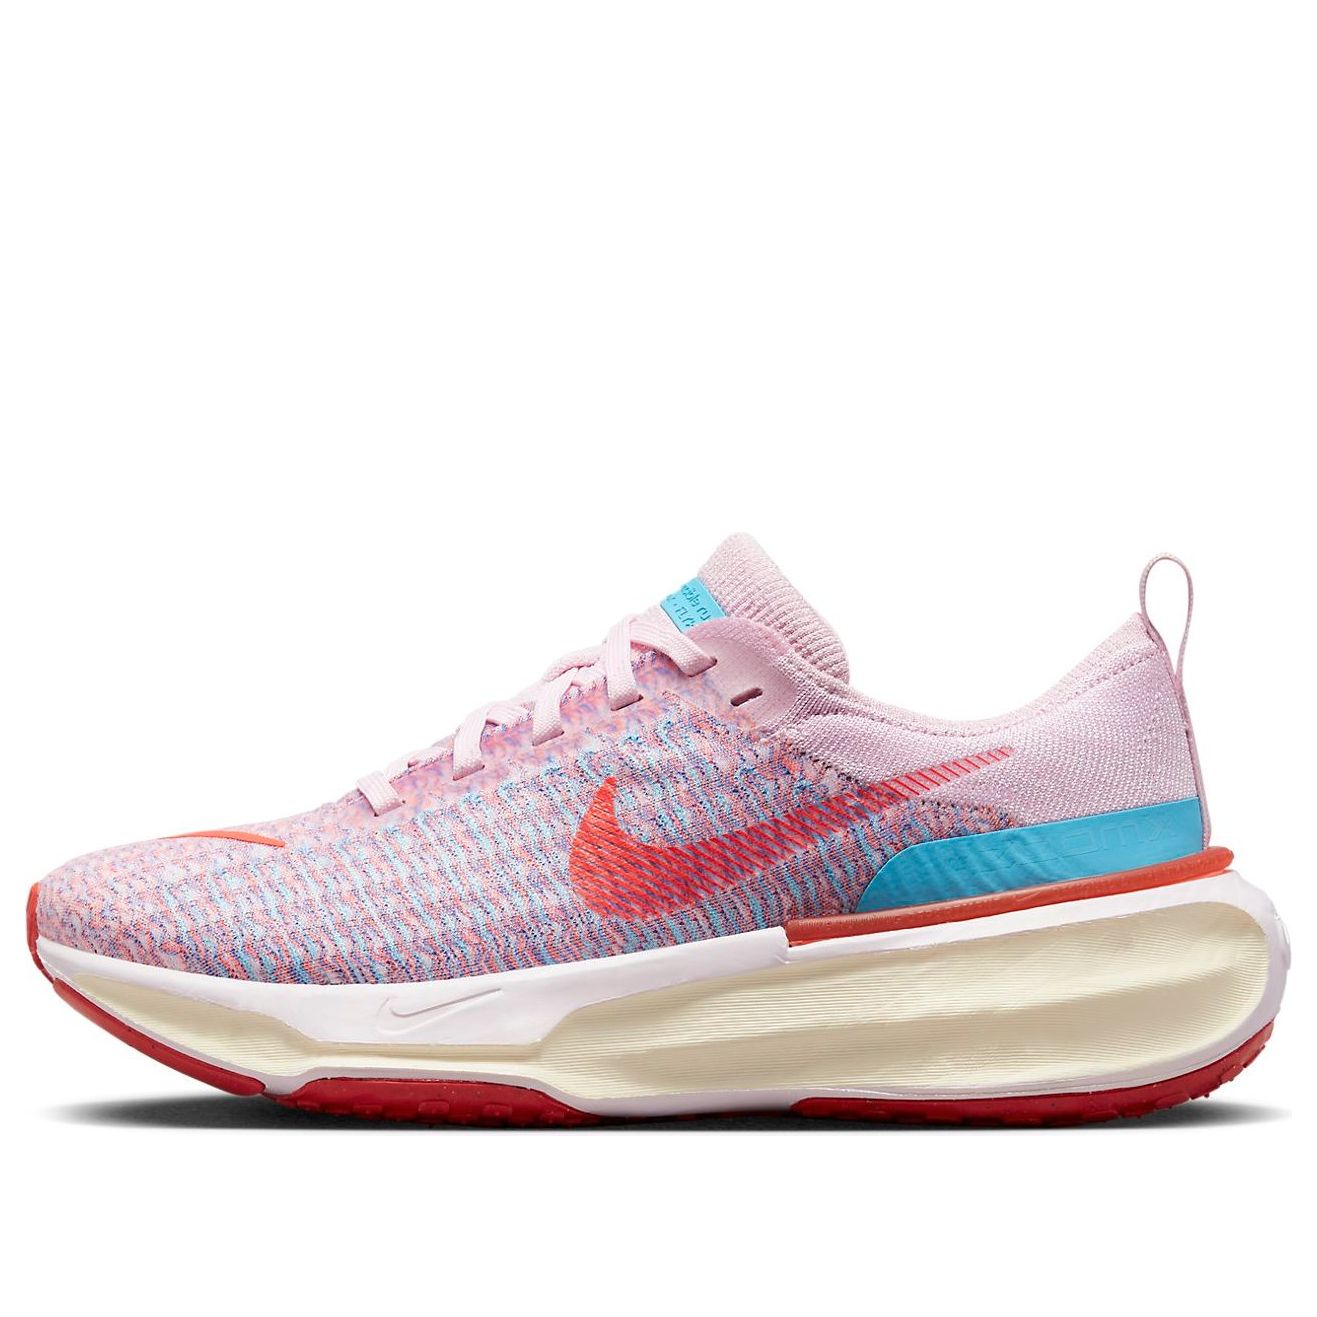 Nike ZoomX Invincible Run Flyknit 3 DR2660-600